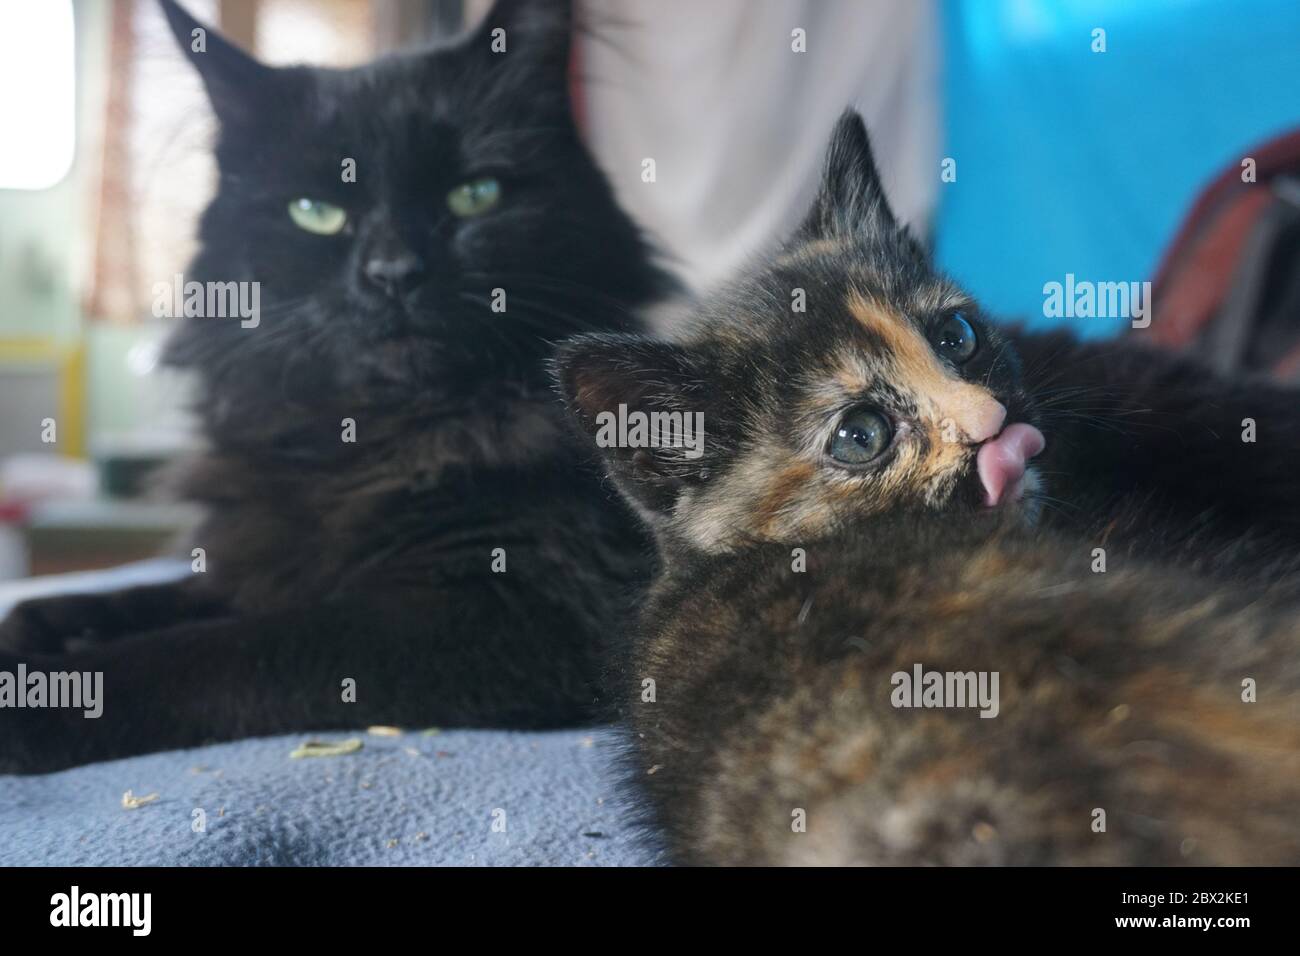 Kitten licking it's nose in front of her Mother Cat. Stock Photo